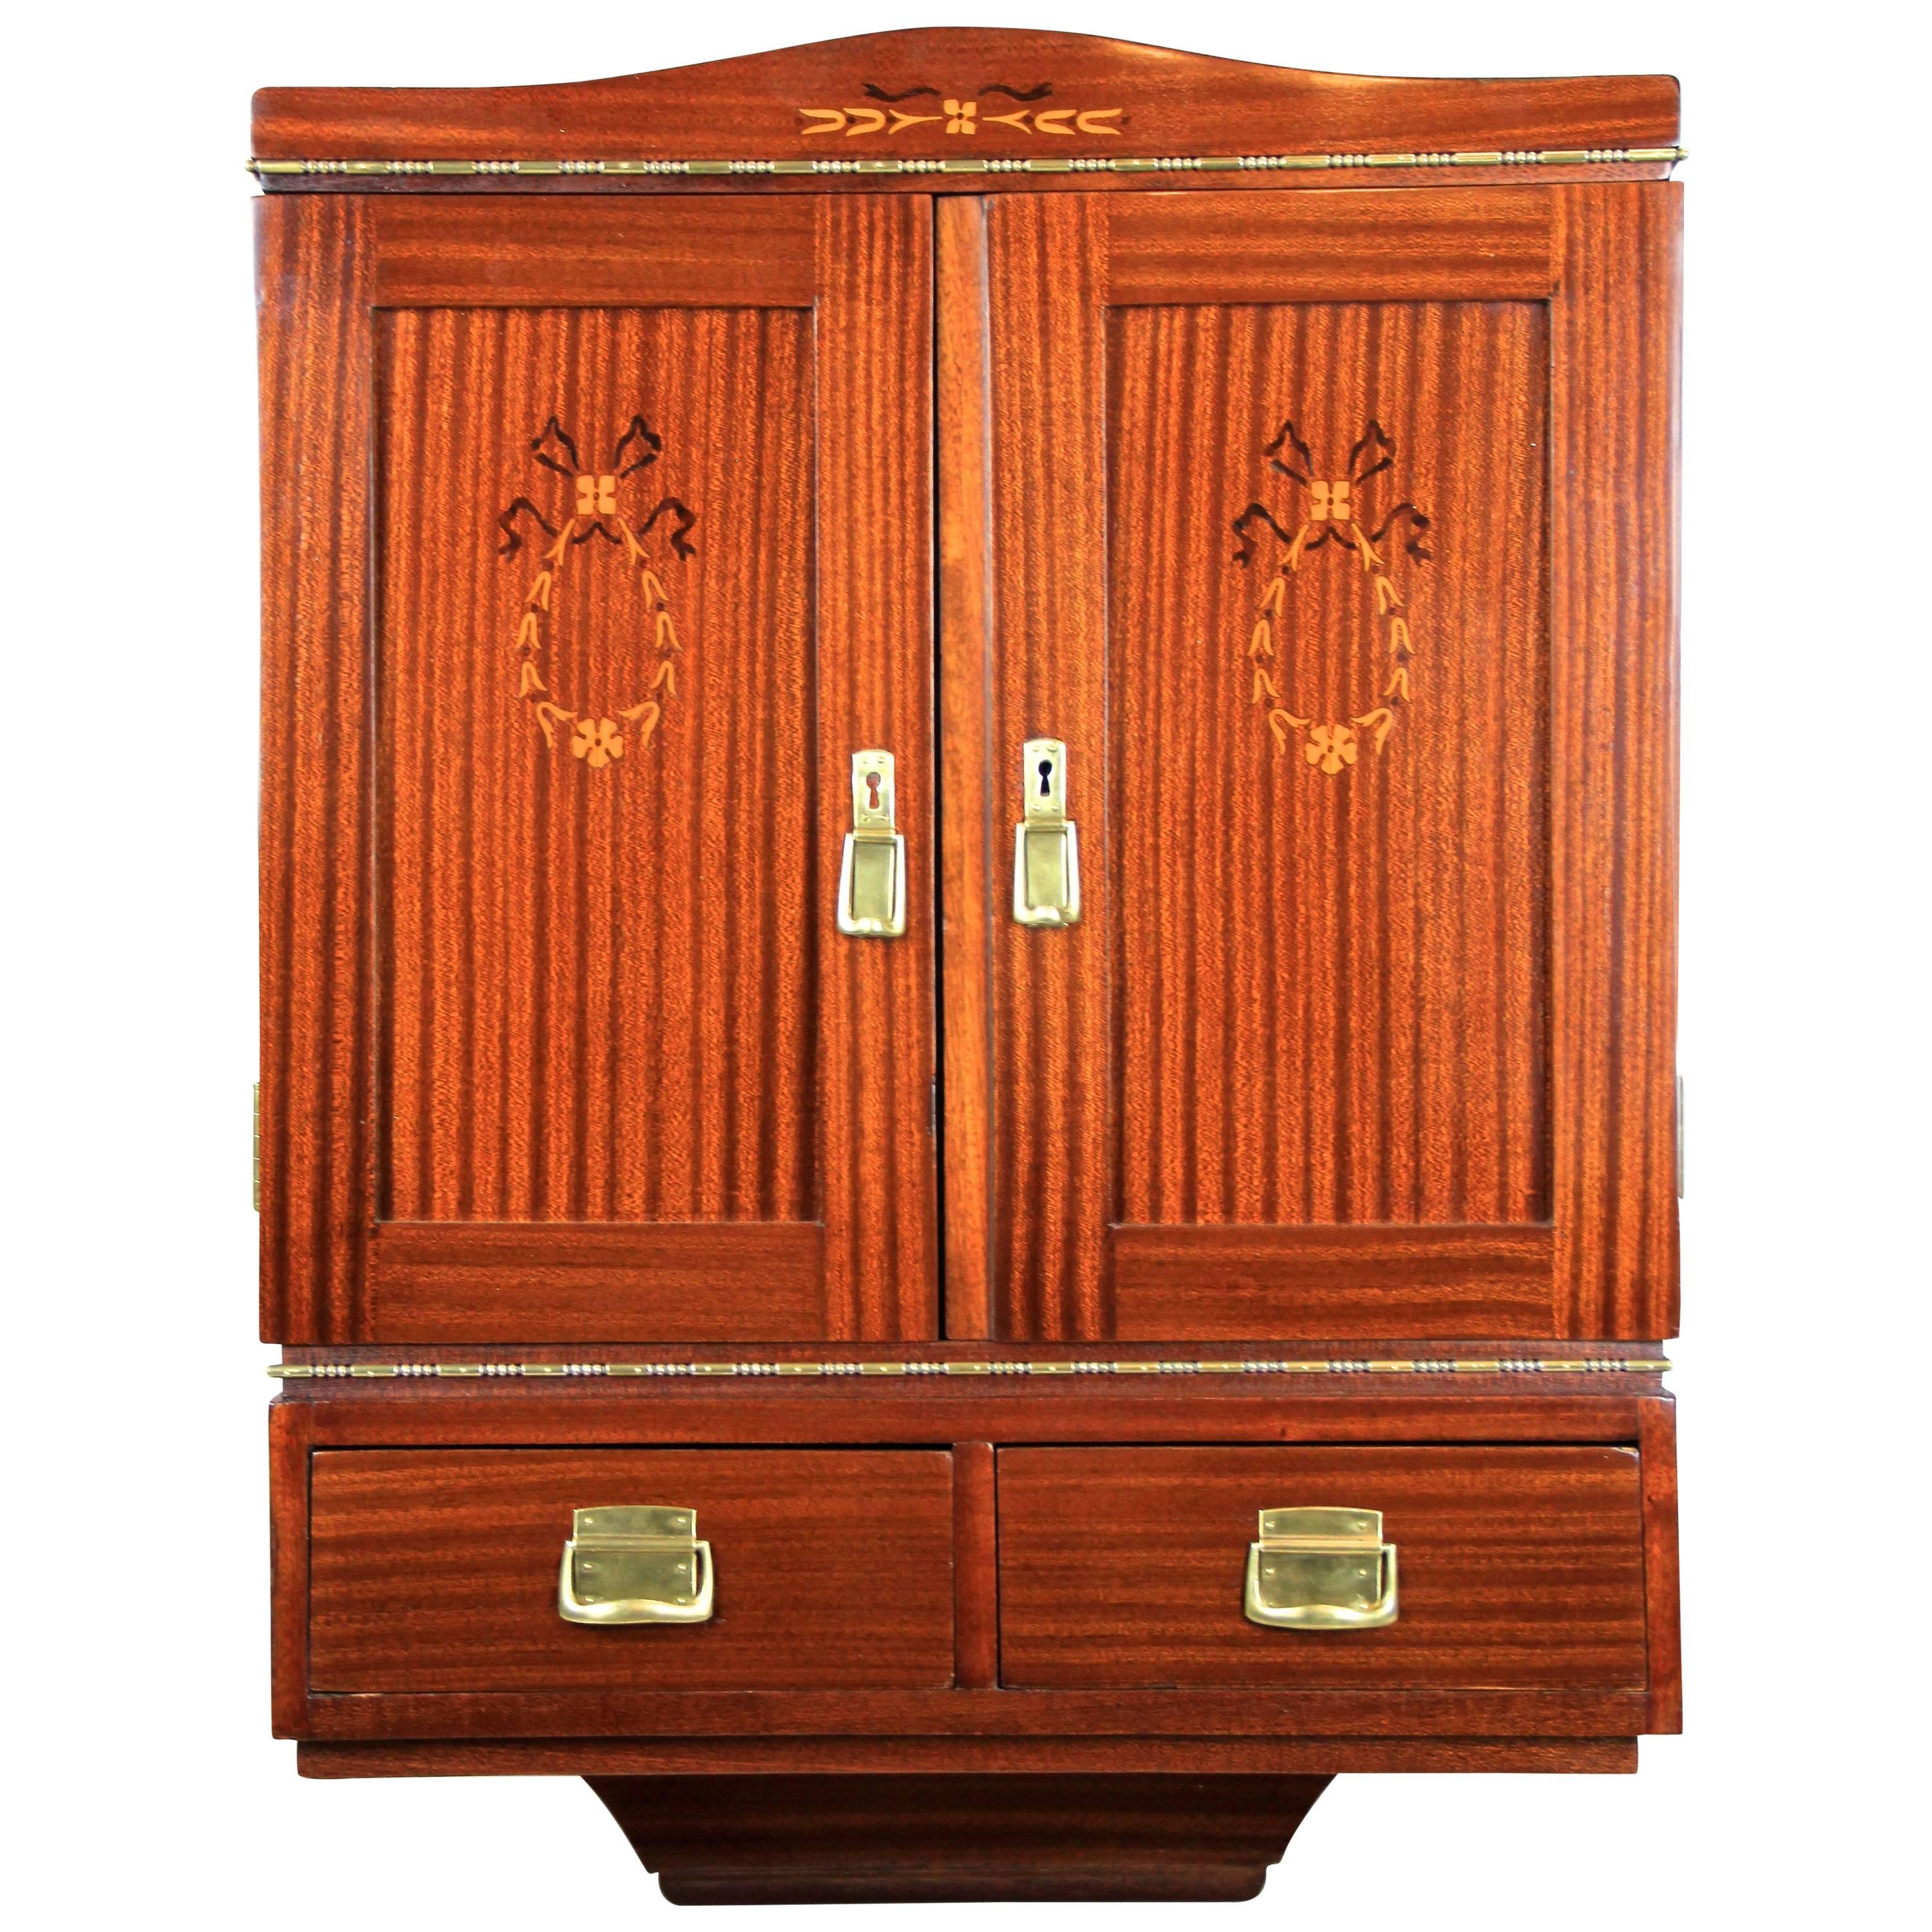 Appealing mahogany wall cabinet from the Art Nouveau period in Austria, circa 1910. Made with finest mahogany veneer, this small wall-mounted cabinet offers two doors with beautiful inlay works in walnut and maple and two small drawers all veneered